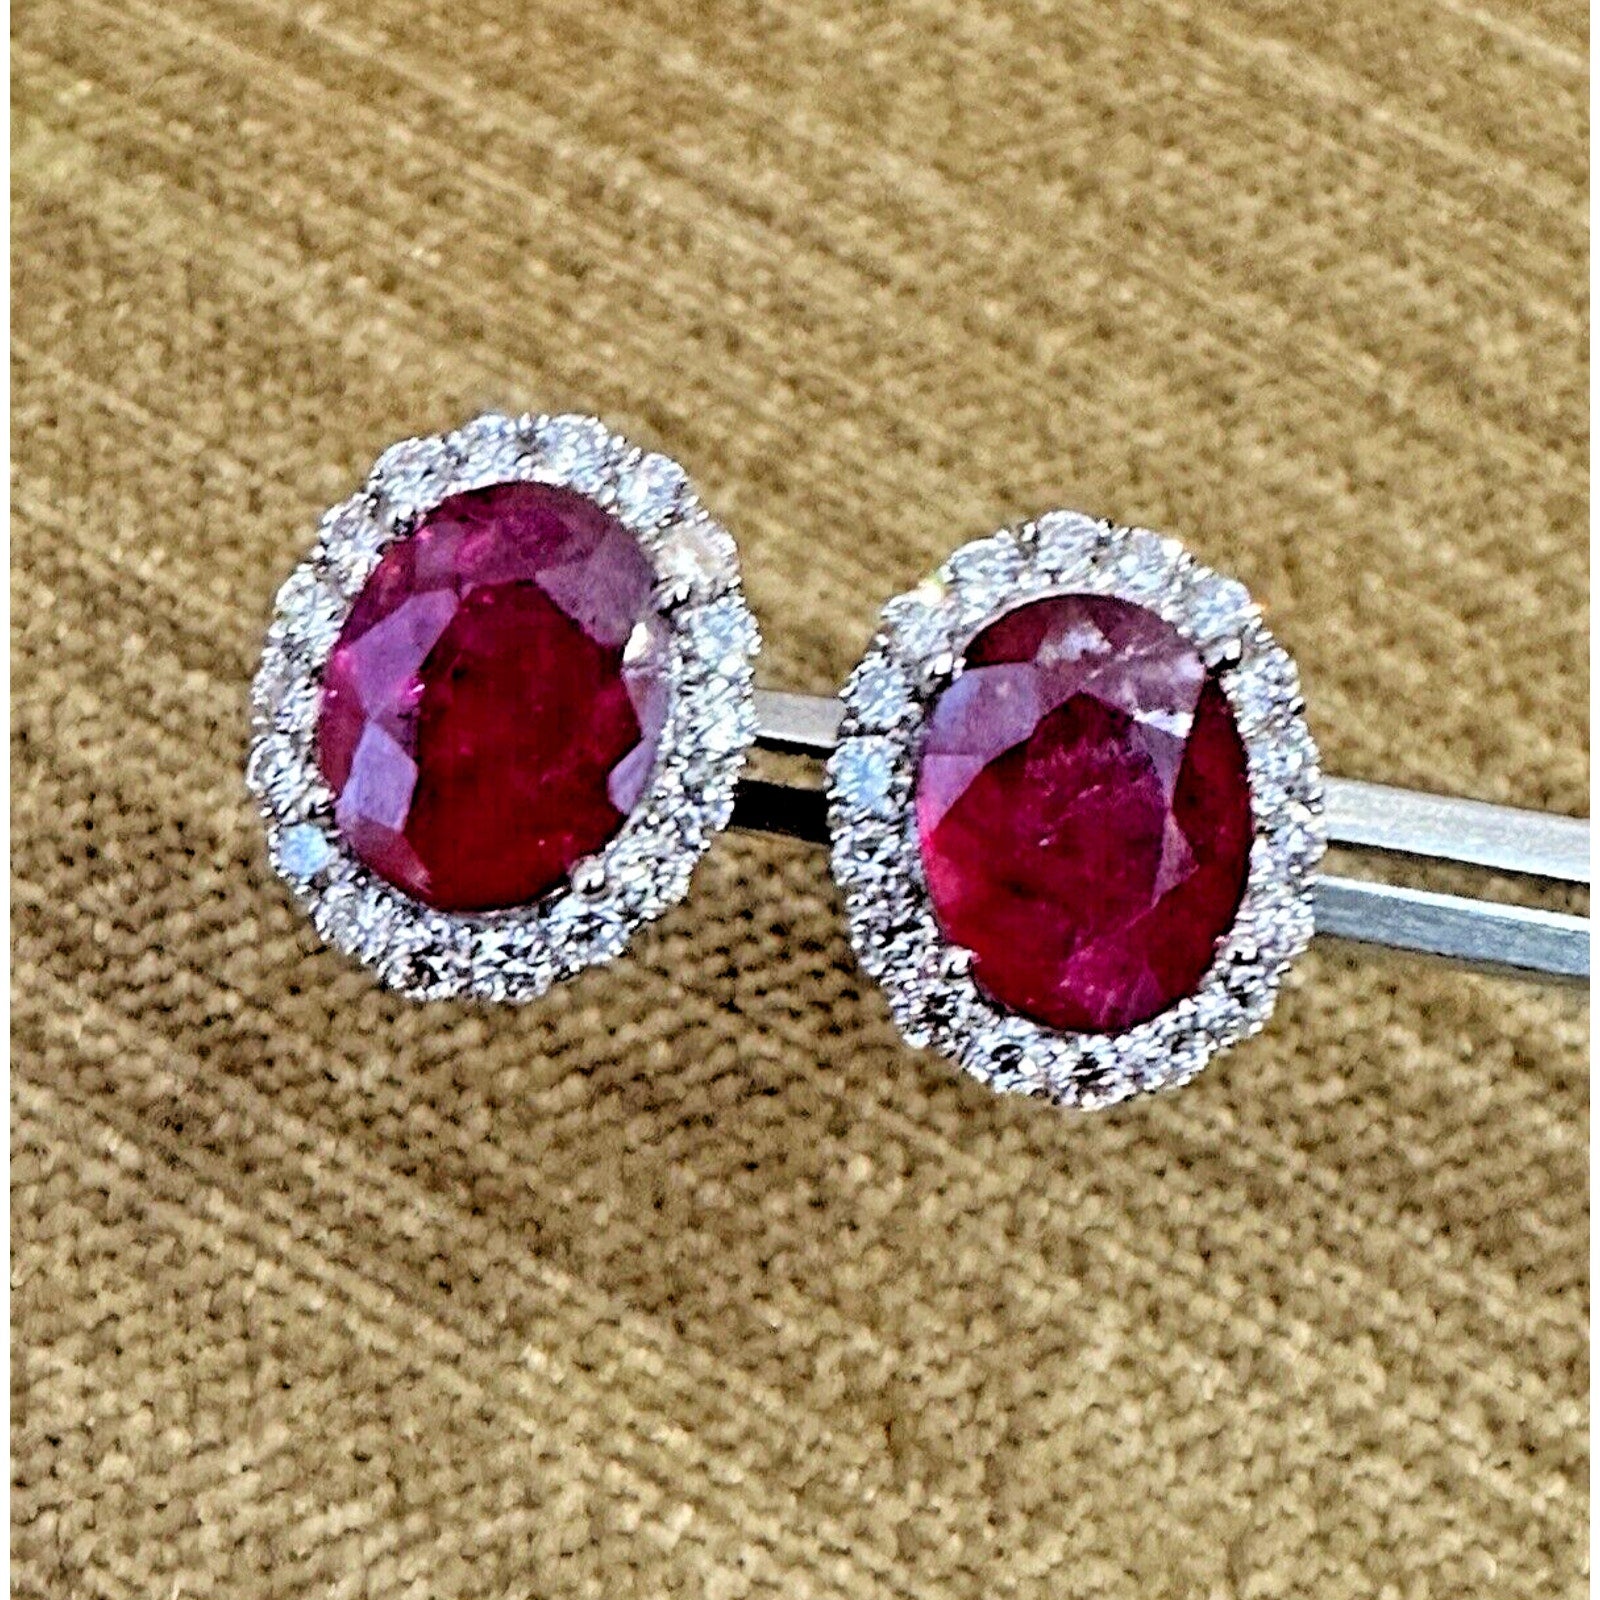 Natural Oval Ruby Stud Earrings with Diamond Halo in 14k White Gold - HM2569B